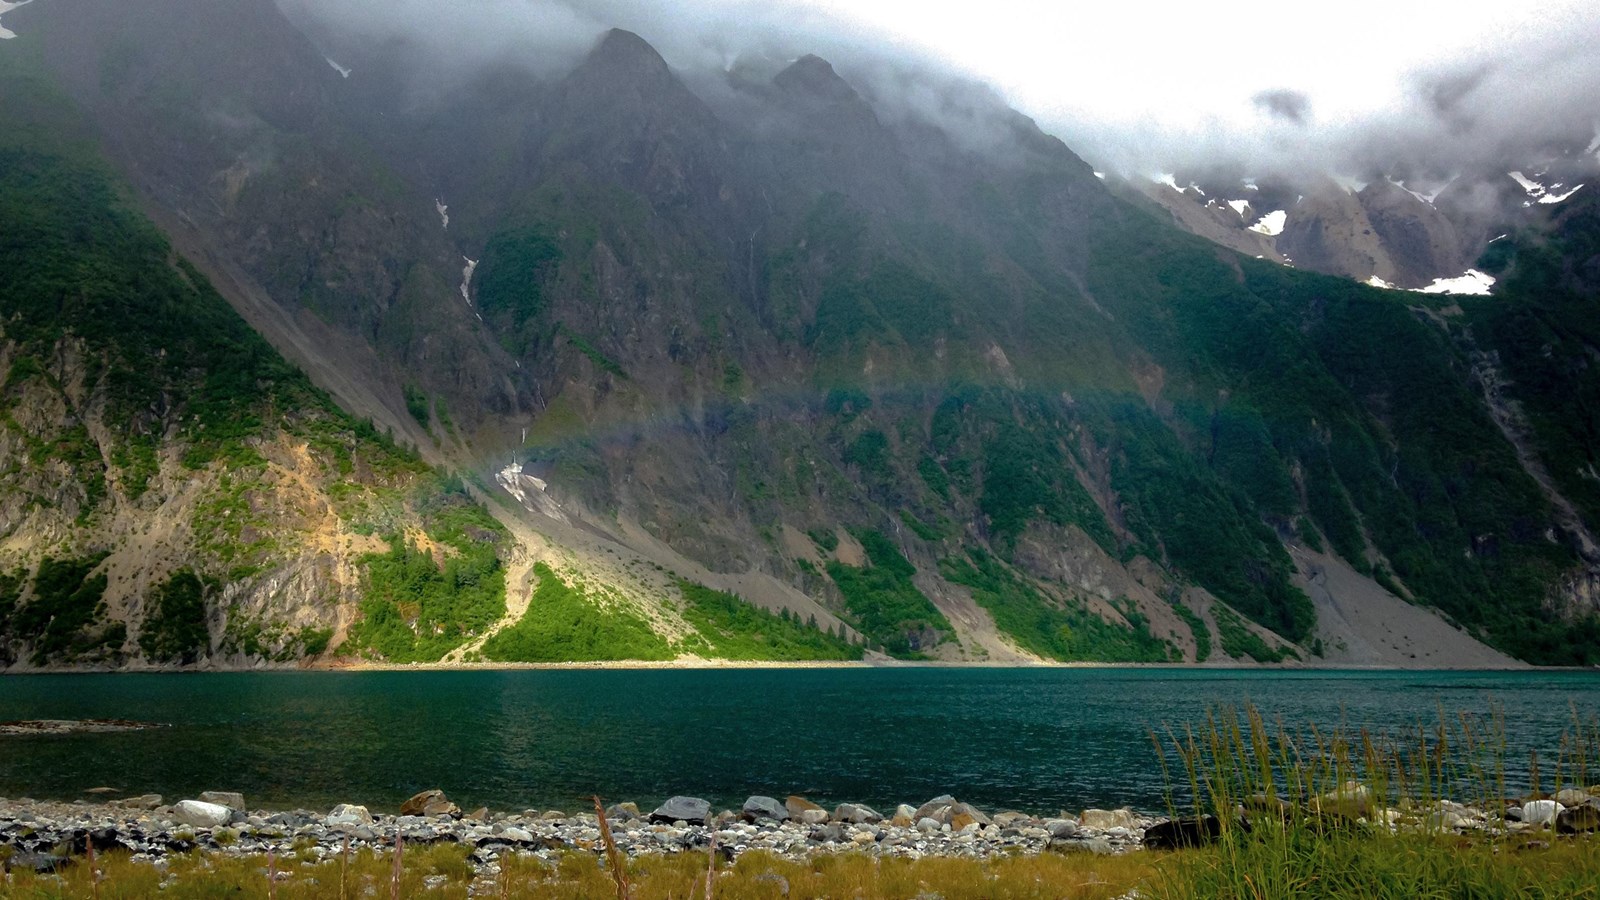 a rainbow stretches above water before a steep mountainous cliff on a cloudy day.